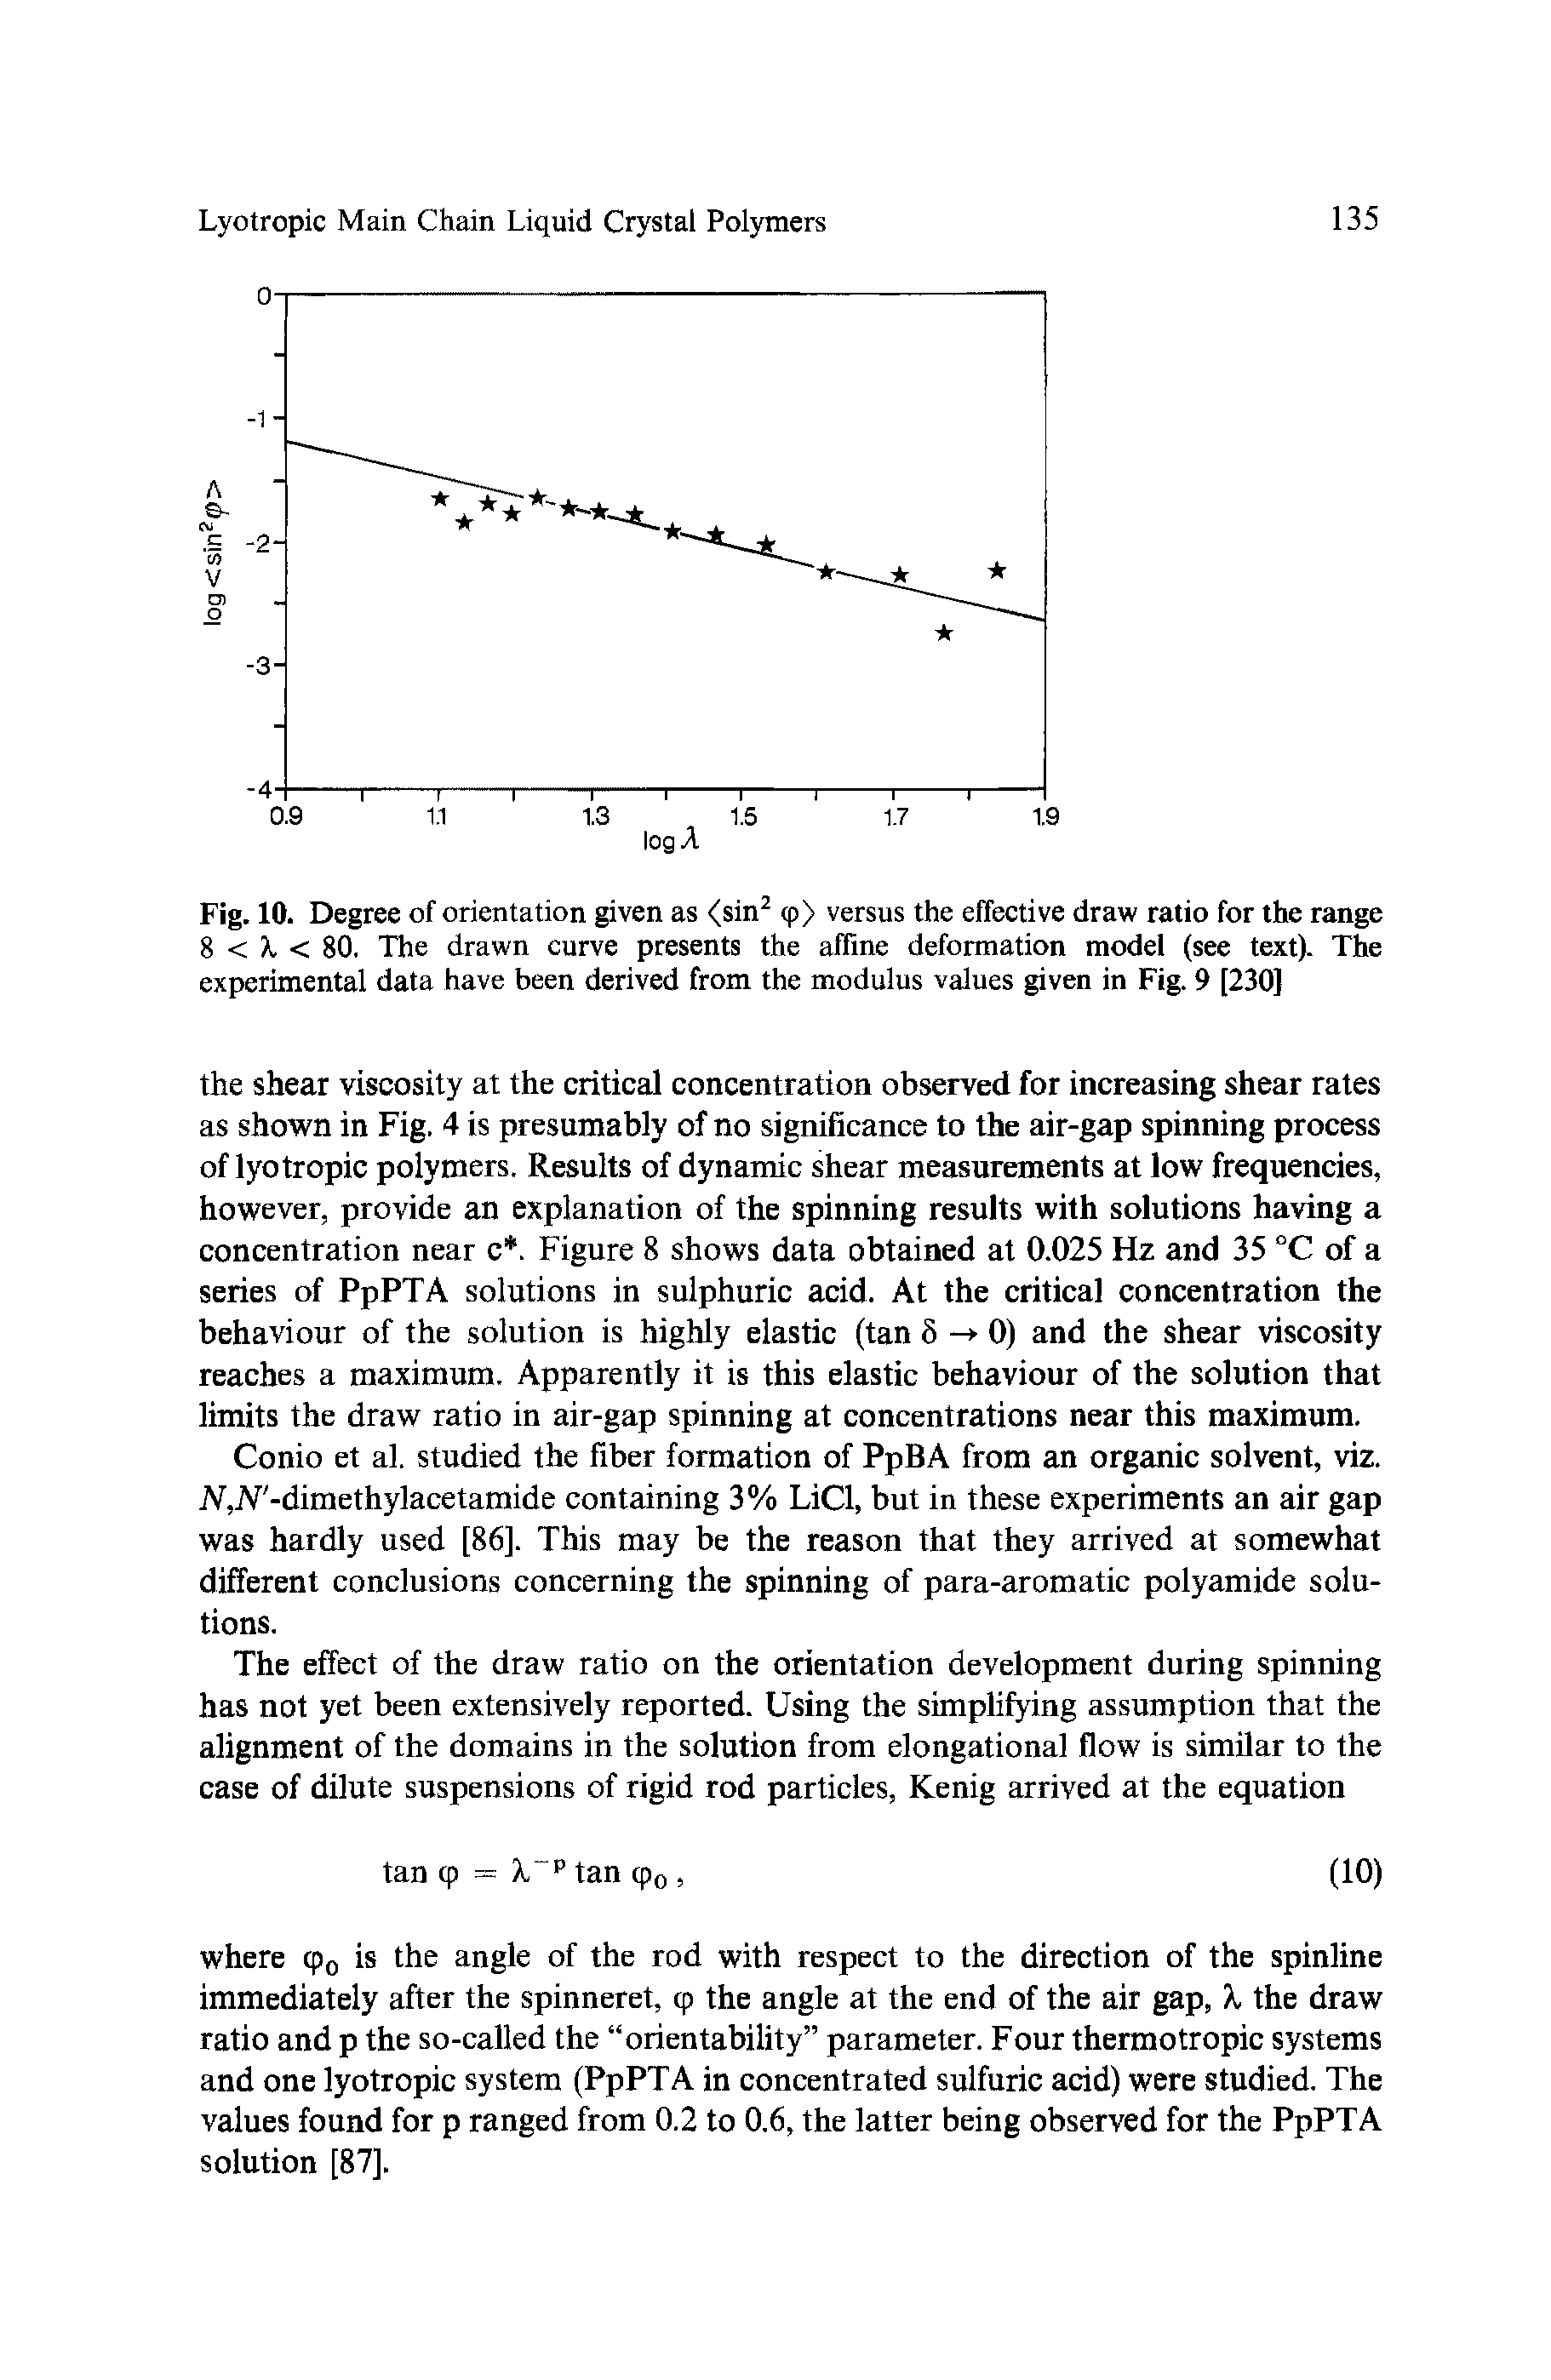 Fig. 10. Degree of orientation given as <sin cp> versus the effective draw ratio for the range 8 < L < 80. The drawn curve presents the affine deformation model (see text). The experimental data have been derived from the modulus values given in Fig. 9 [230]...